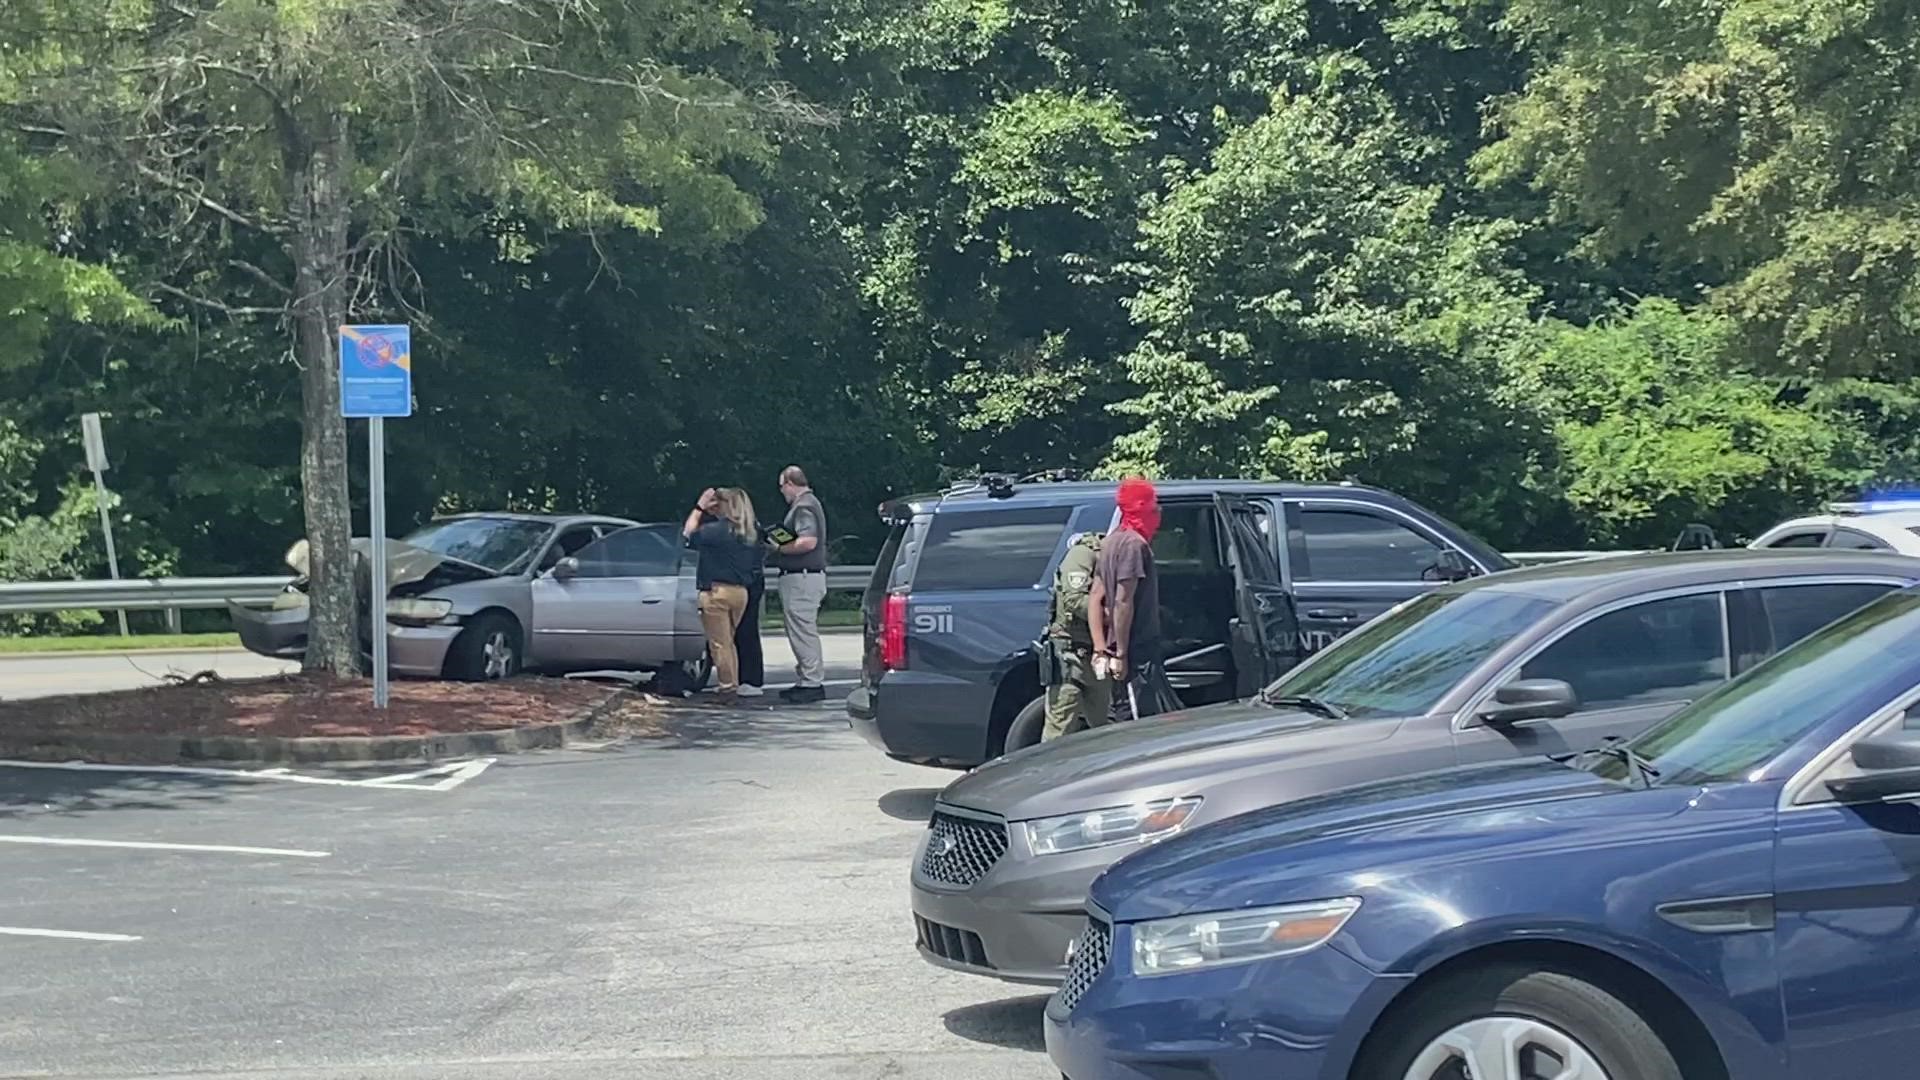 The Sheriff's Office is investigating whether shots were fired in the parking lot.